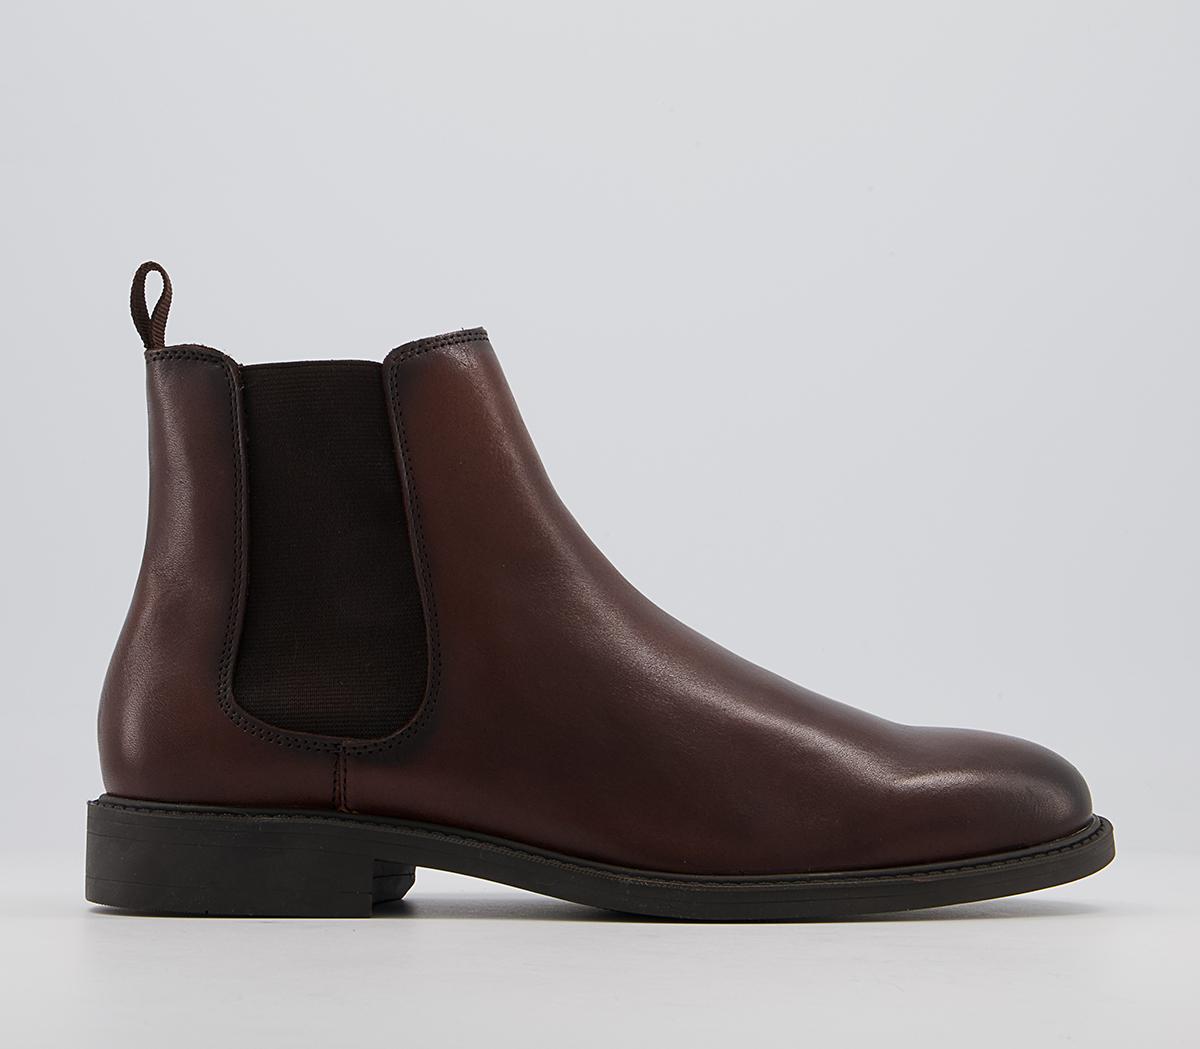 OFFICE Bruno Chelsea Boots Brown Leather - Men’s Boots